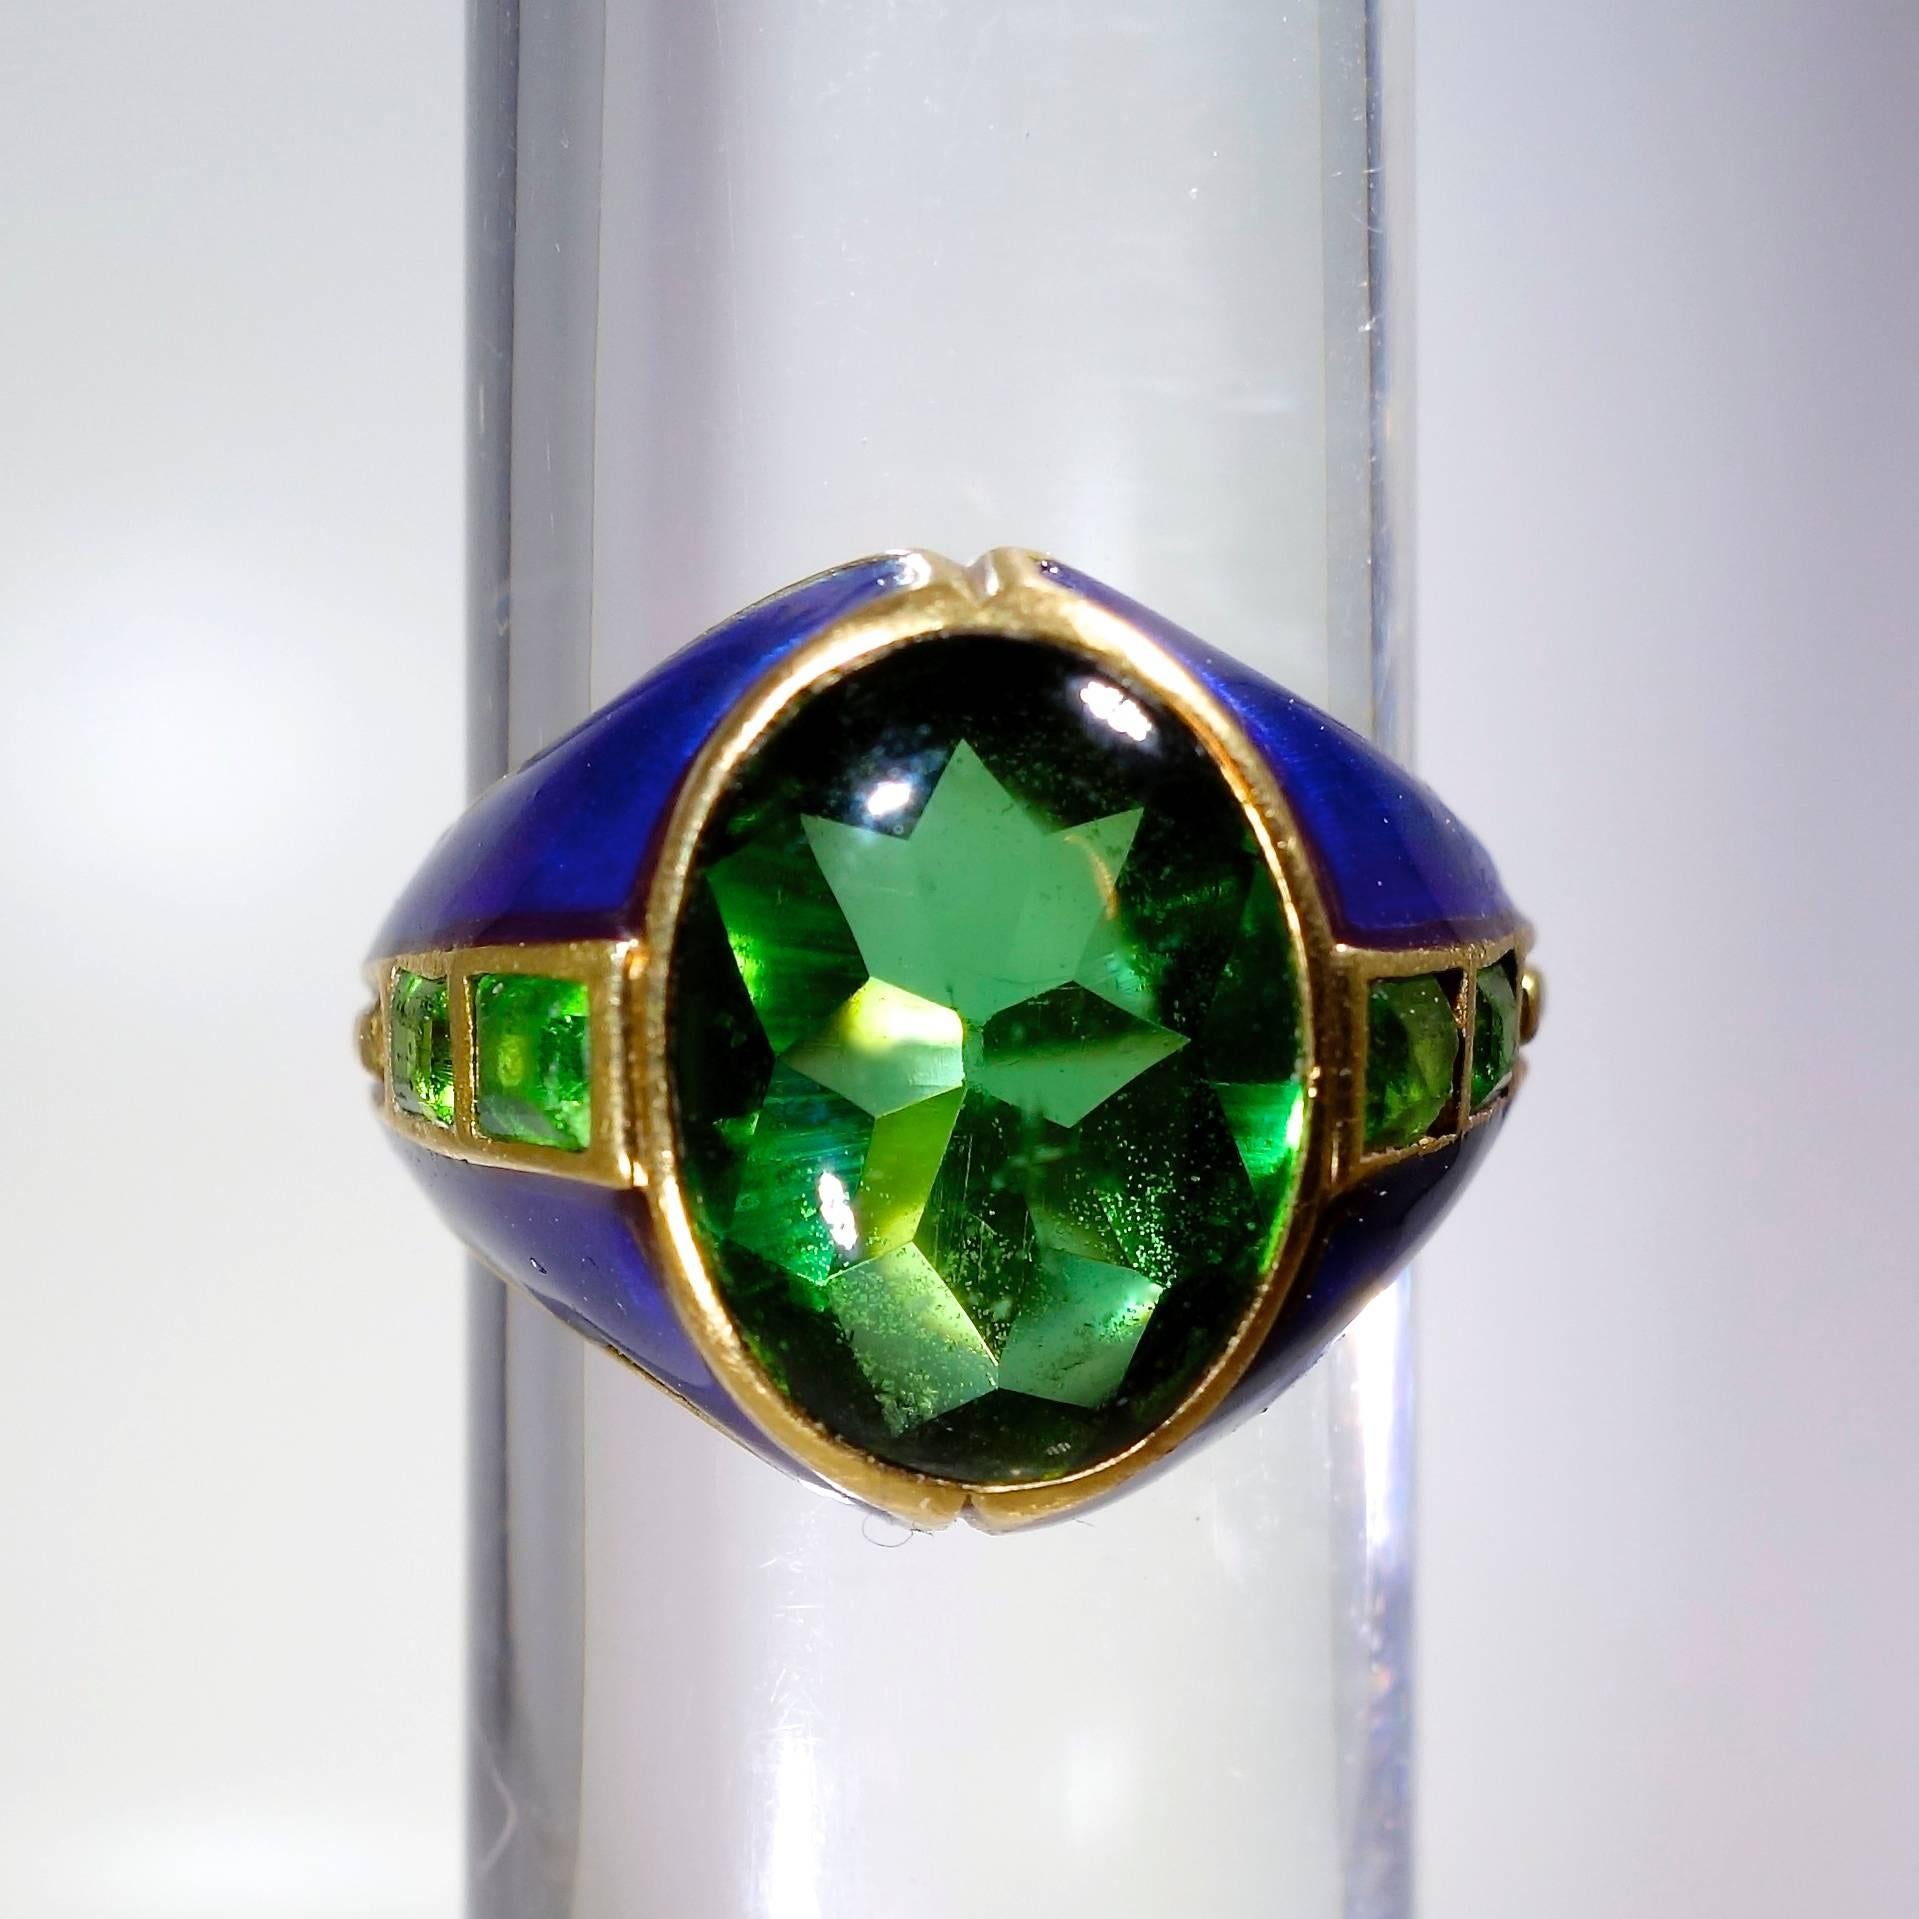 The  center stone is a buff top faceted bottom Peridot, 11.6 by 8.8 mm.,  bright cobalt blue iridescent enamel, 4 square cut Demontoid garnets, and a gold bead design which further accent the sides.  The book, Louis Comfort Tiffany by John Loring,